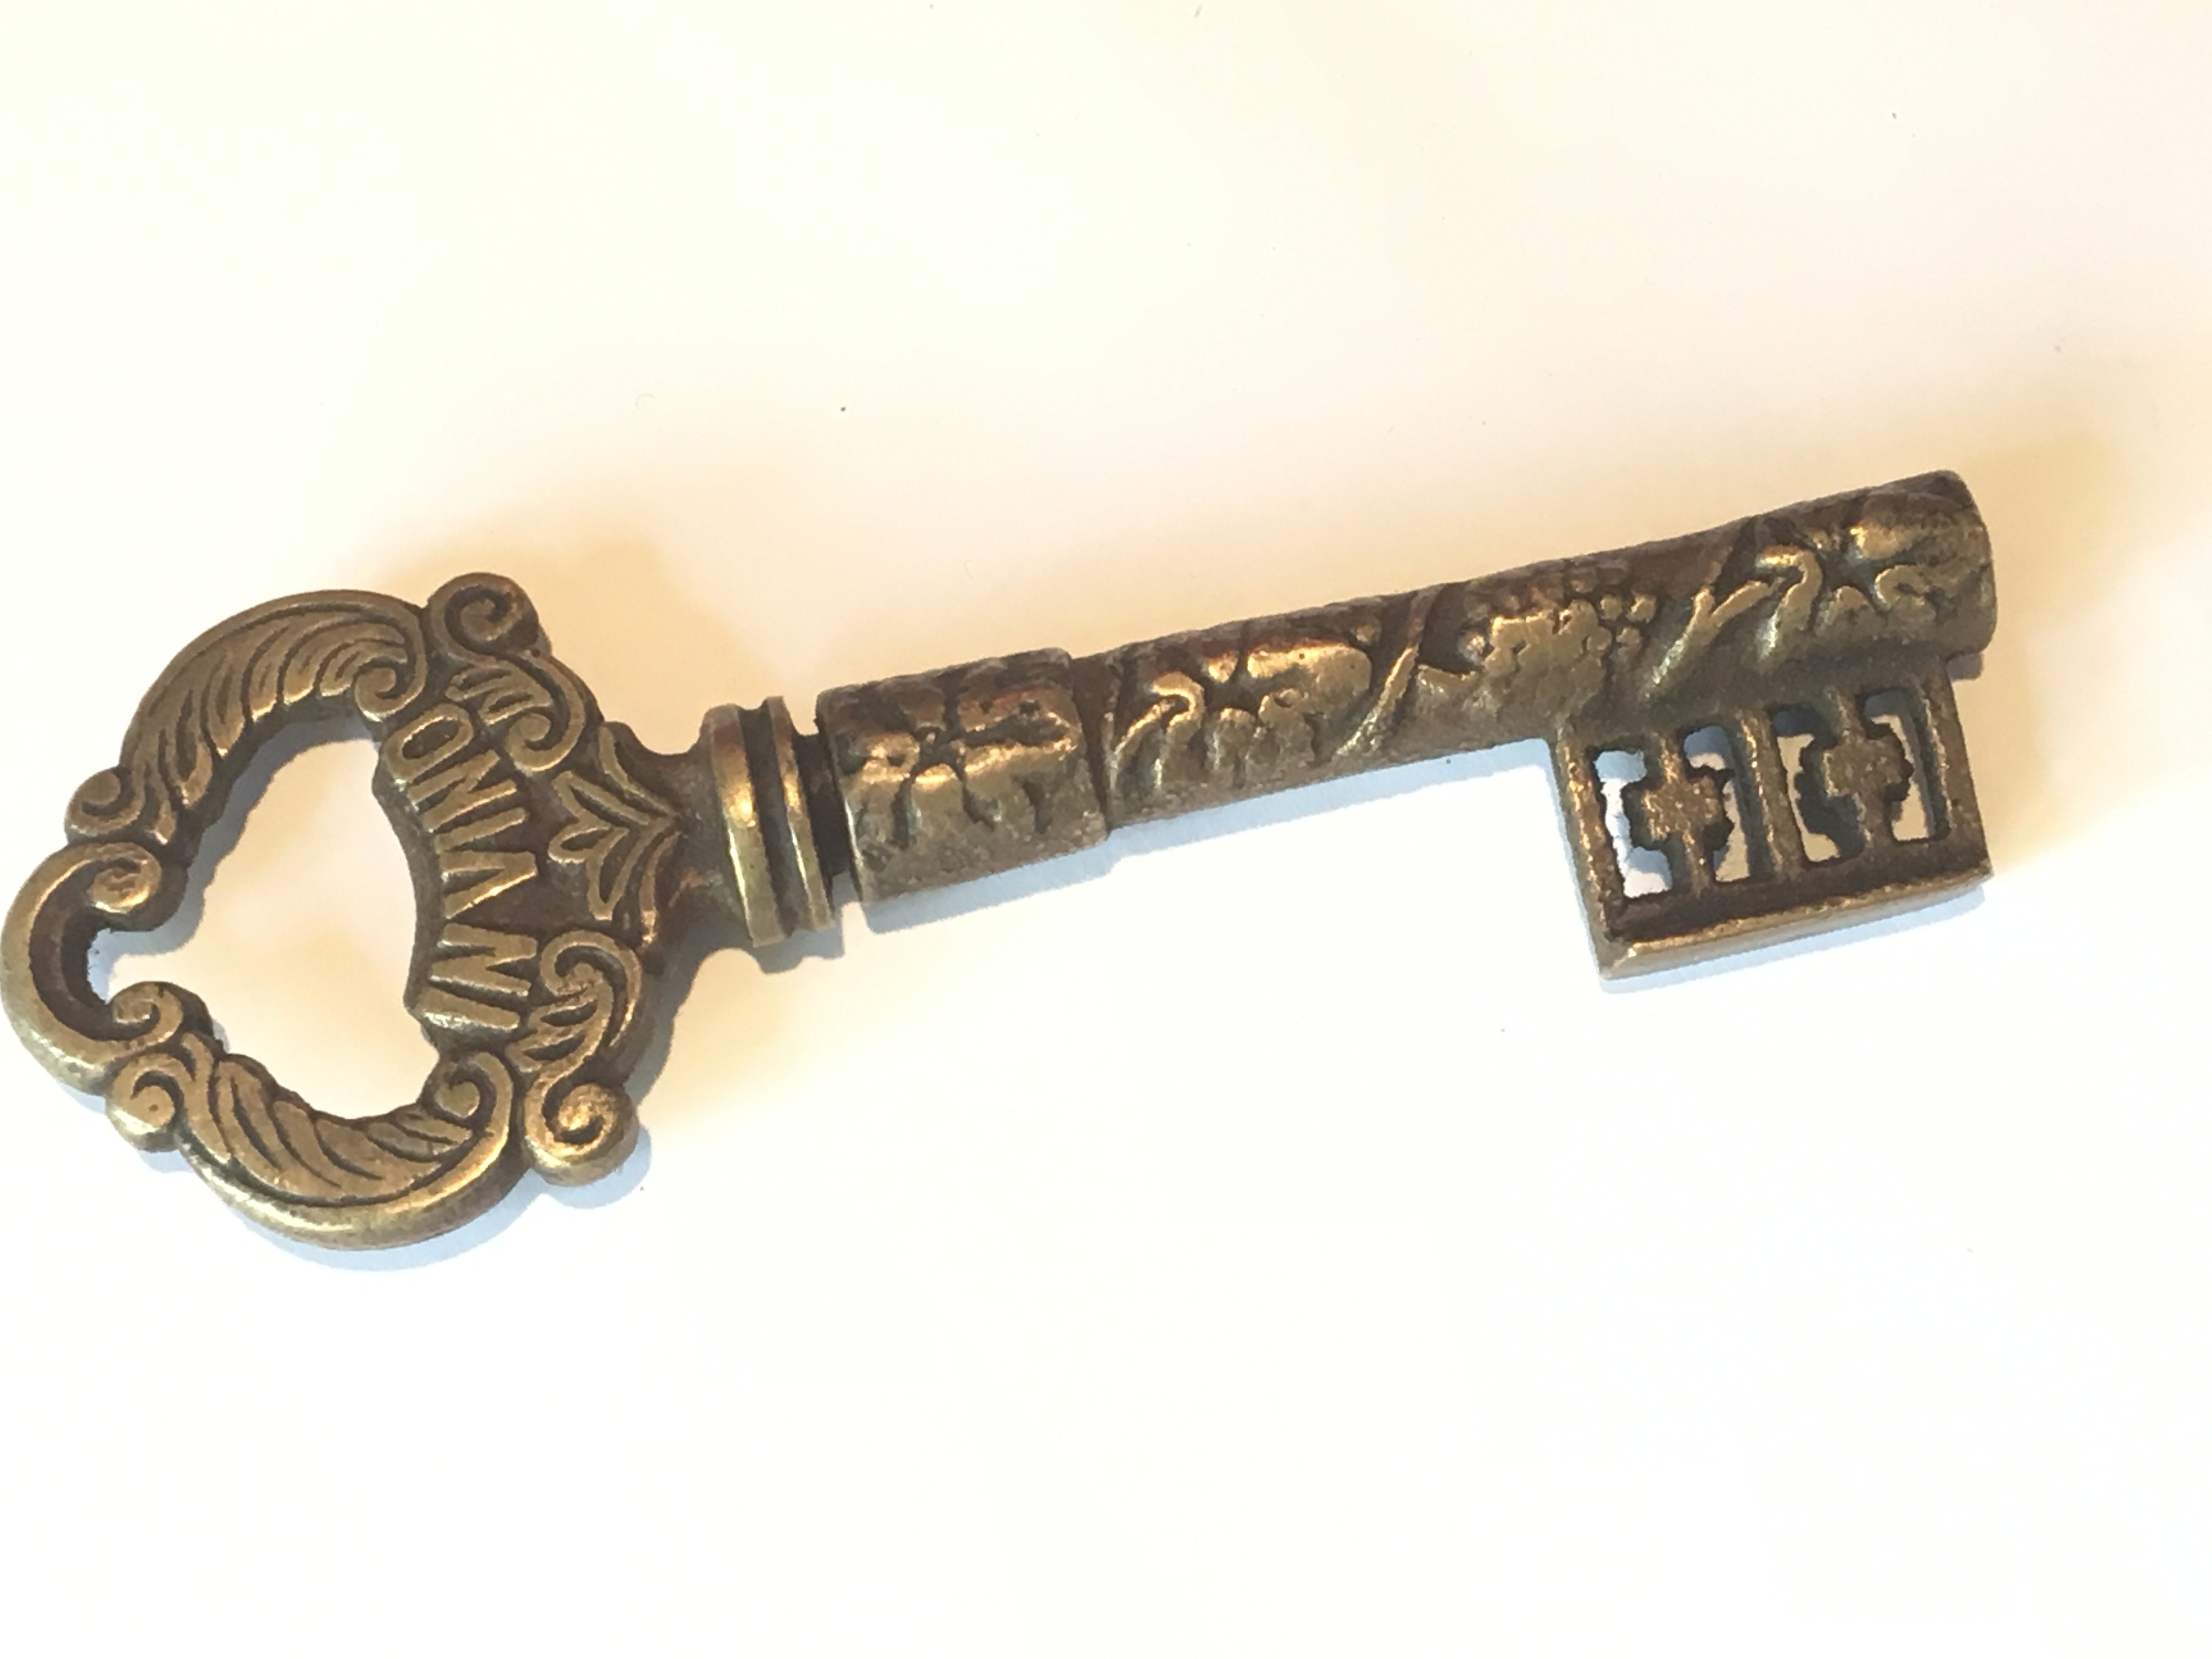 A Novelty brass Victorian butlers key with retractable knife, bottle opener. 13.5cm long. - Image 2 of 2